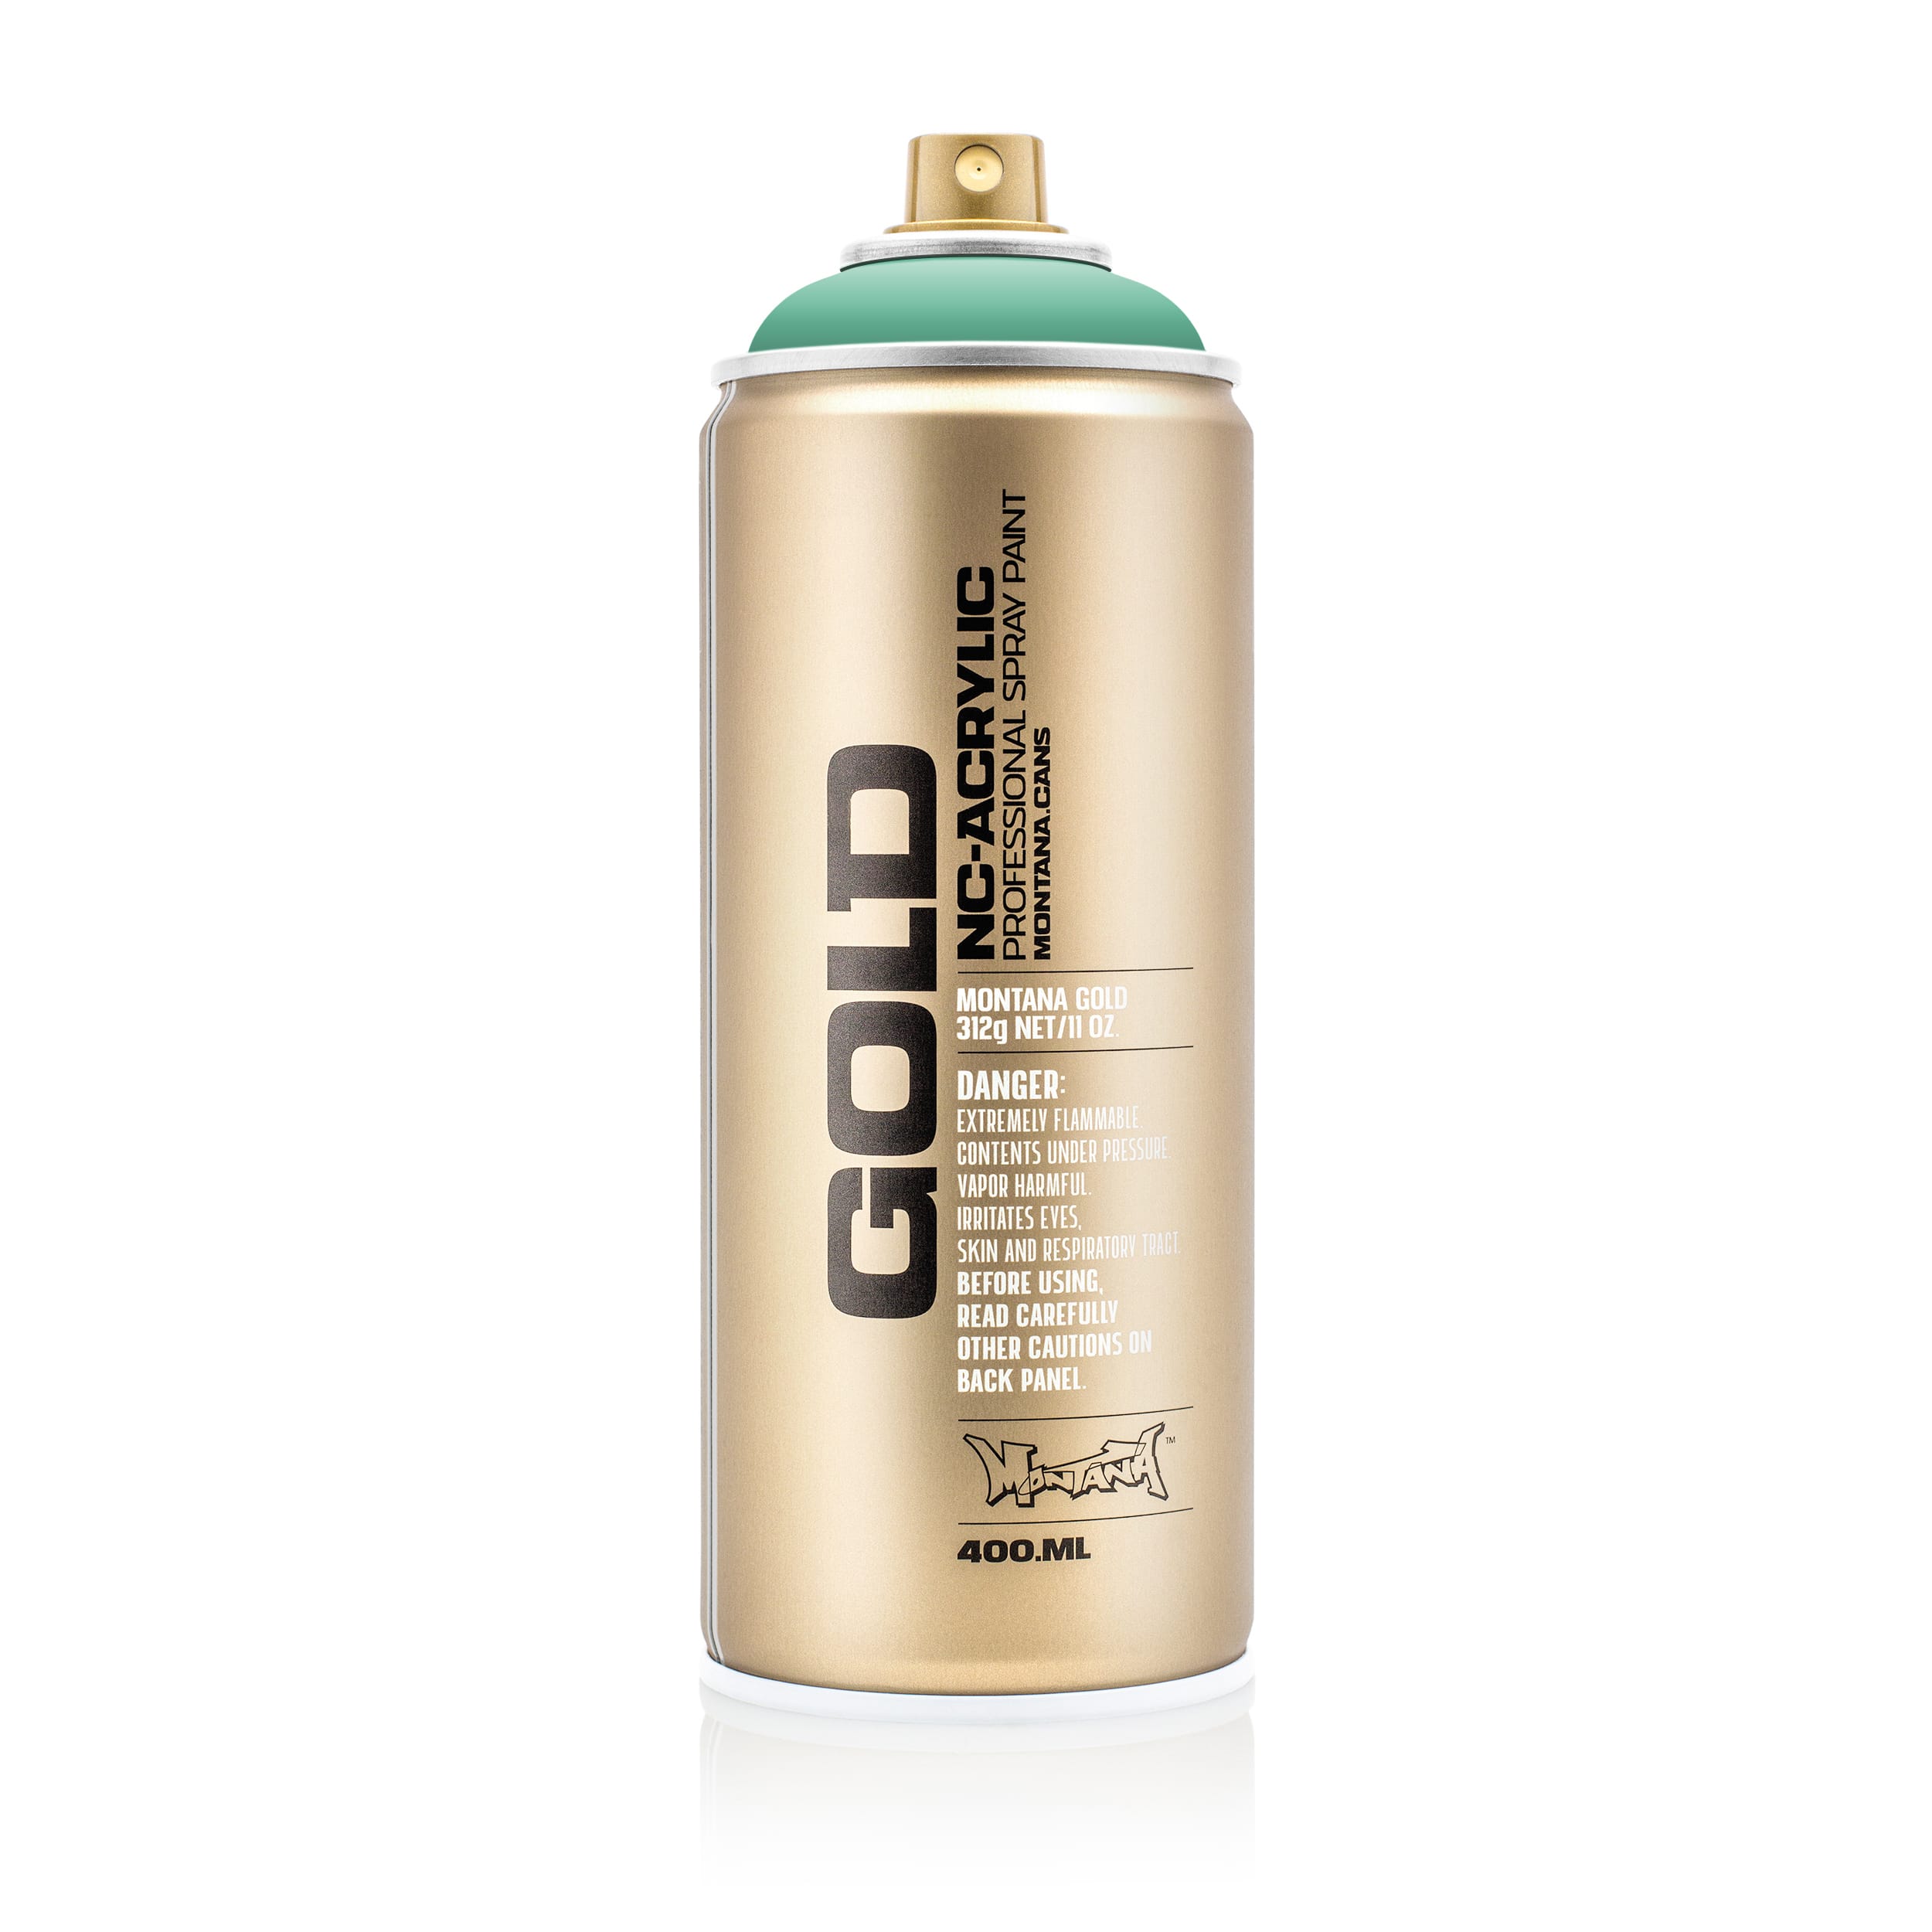 Montana Cans GOLD Spray Paint, 400ml, Malachite - image 1 of 7